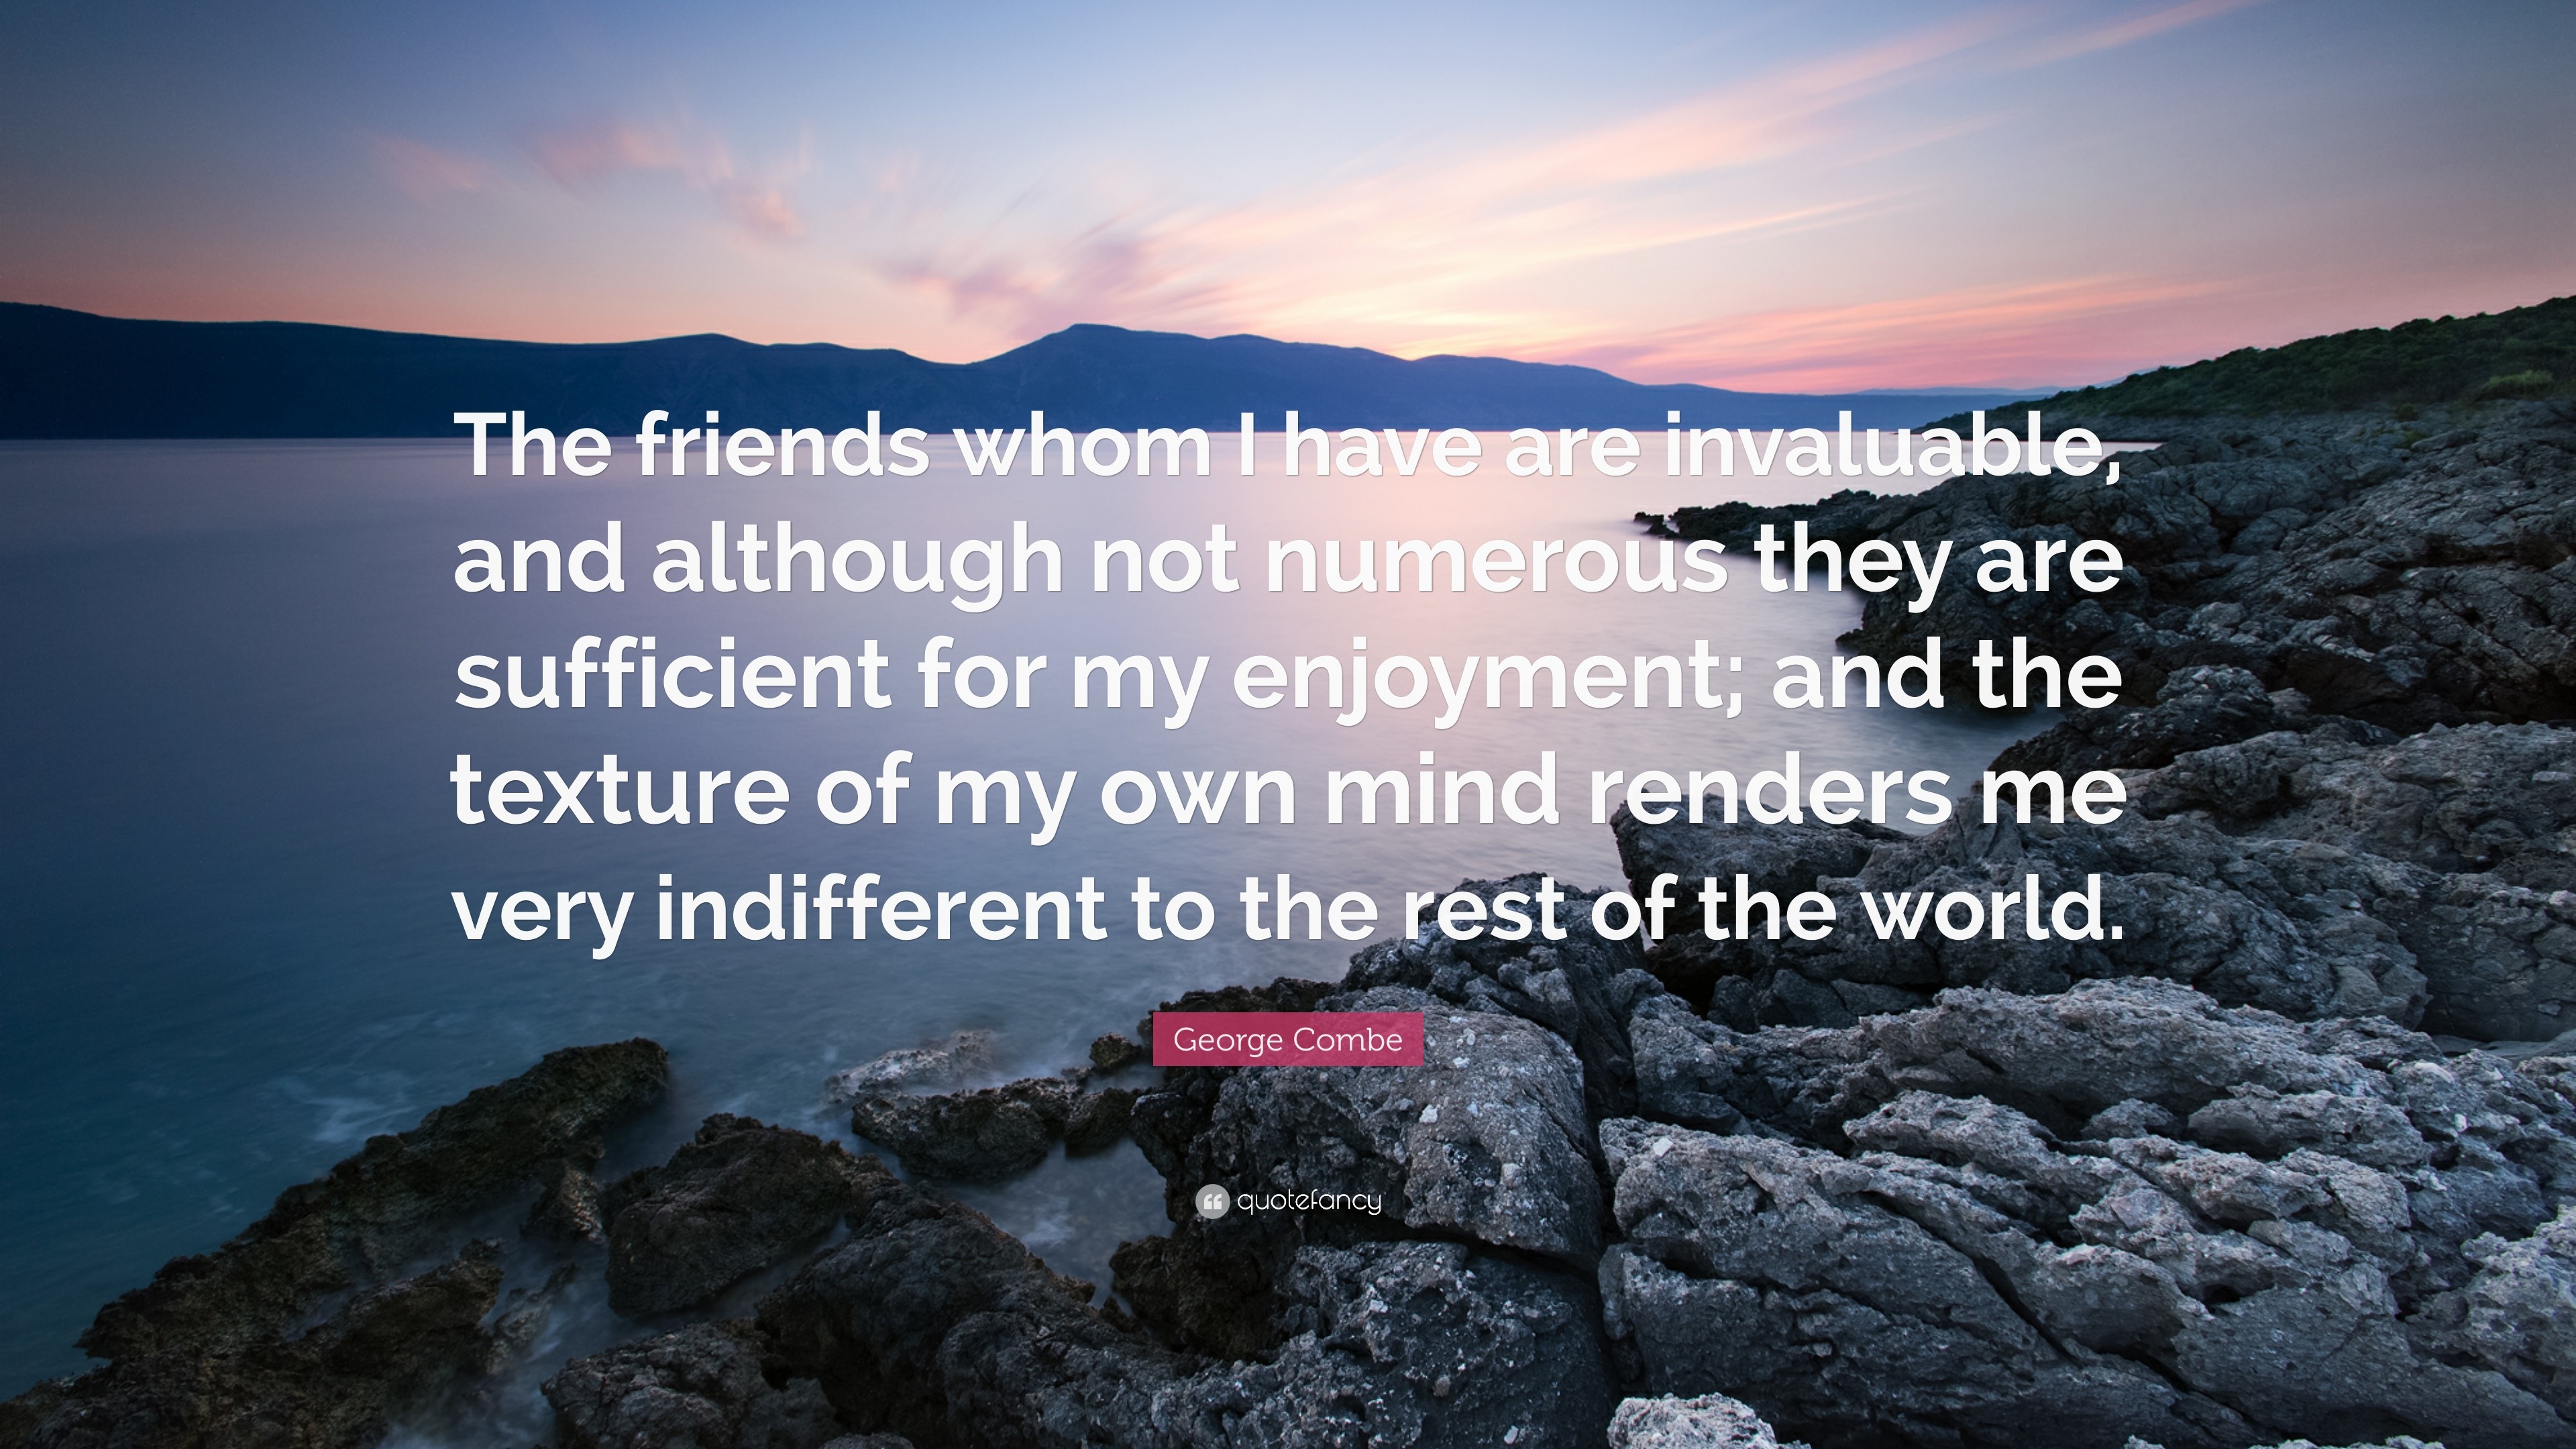 George Combe Quote: “The friends whom I have are invaluable, and ...